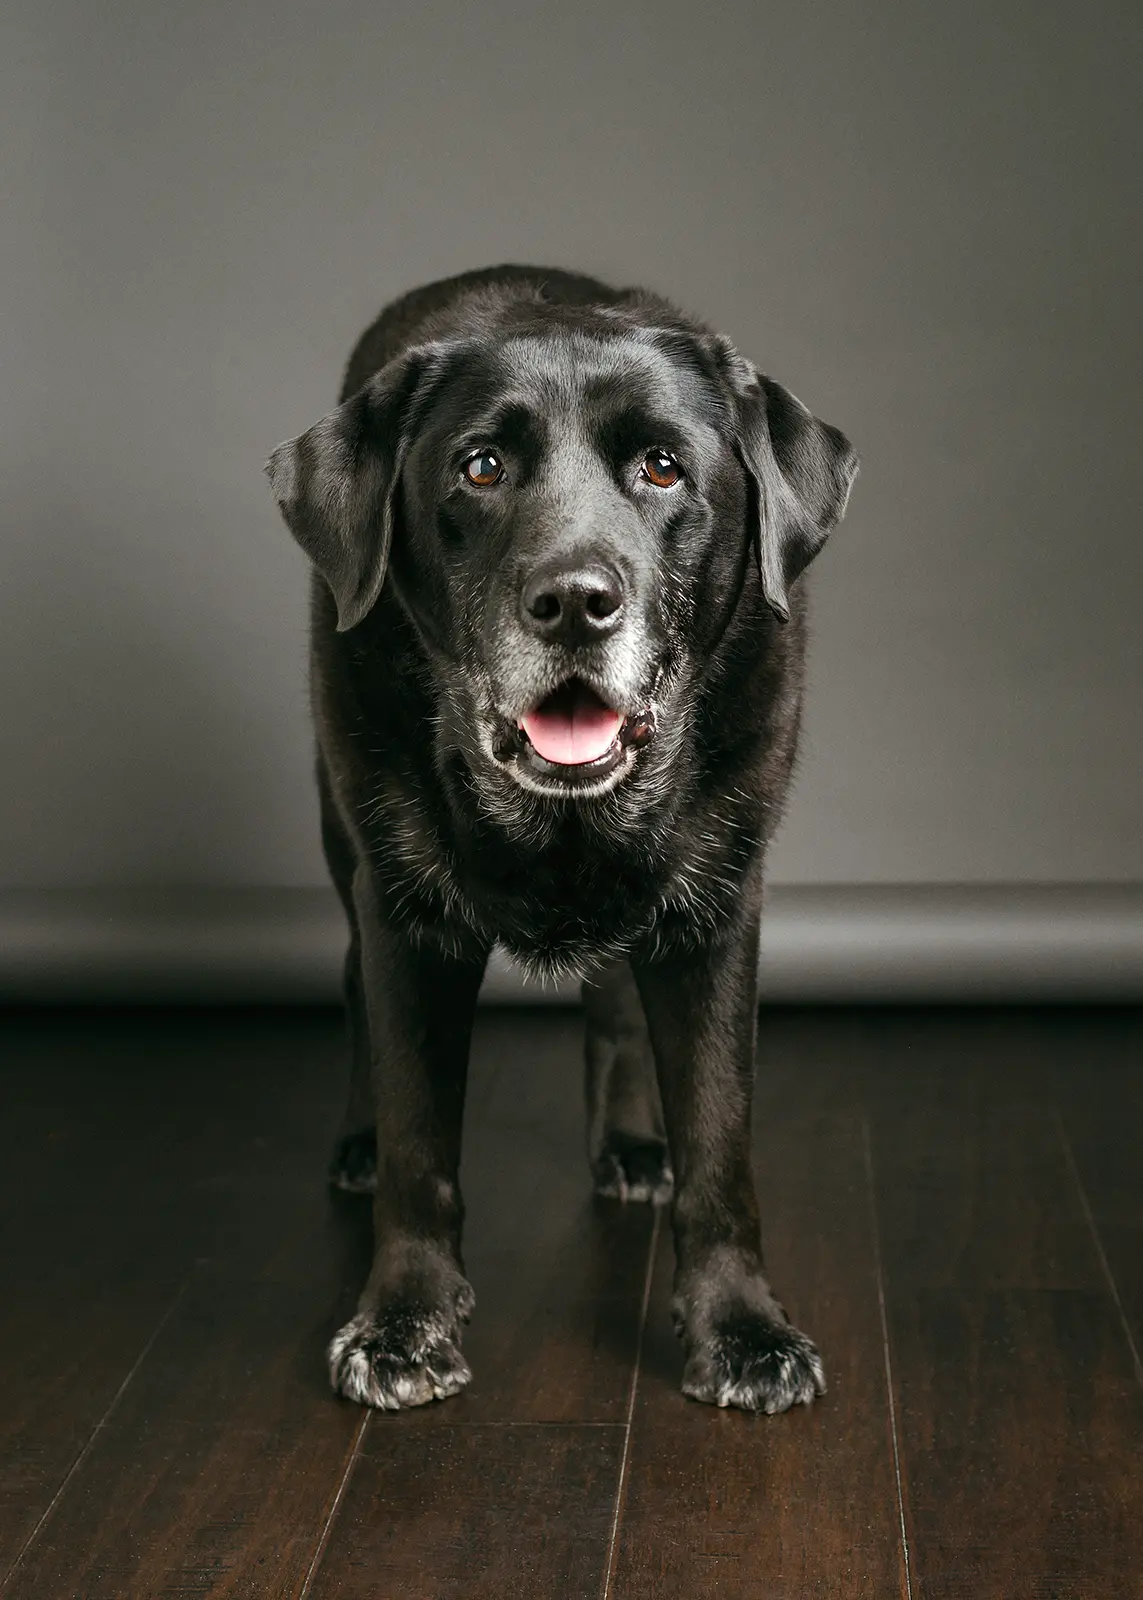 Old black Labrador dog standing in front of a gray background.